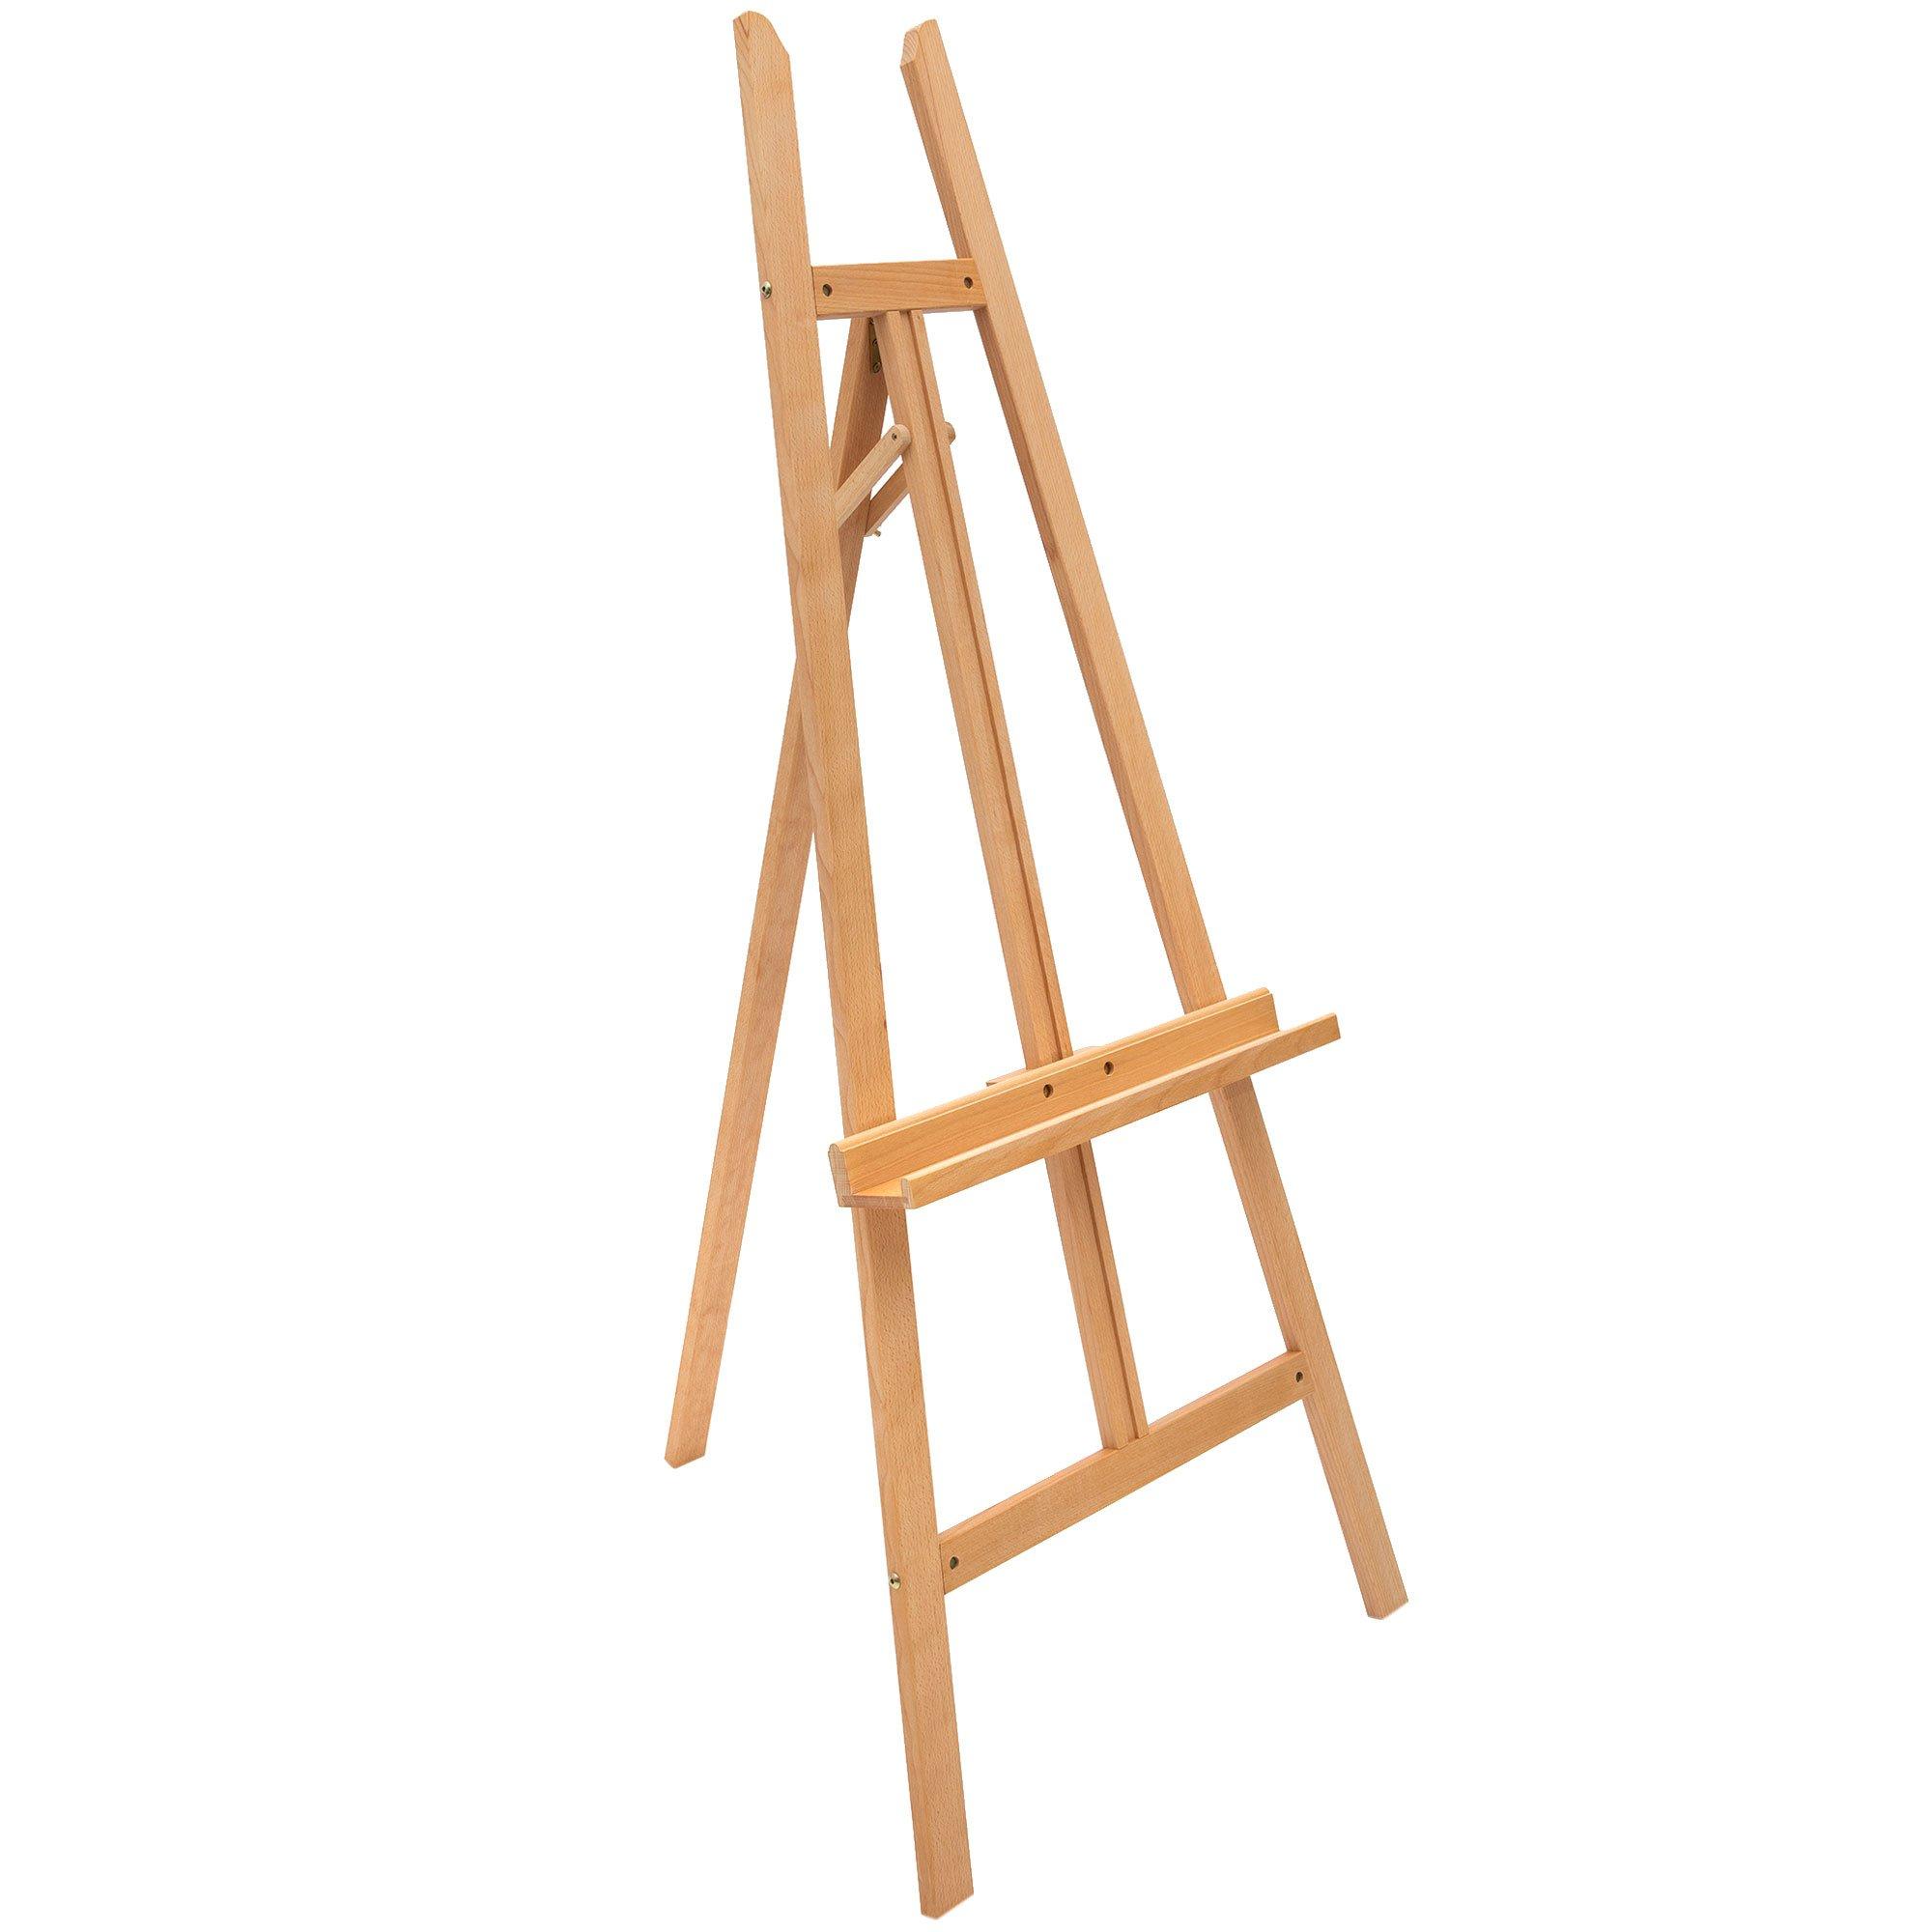 Pine Wood Painting Easel Stand w/ Adjustable Height and Storage for Brush  Black, 1 Unit - Kroger